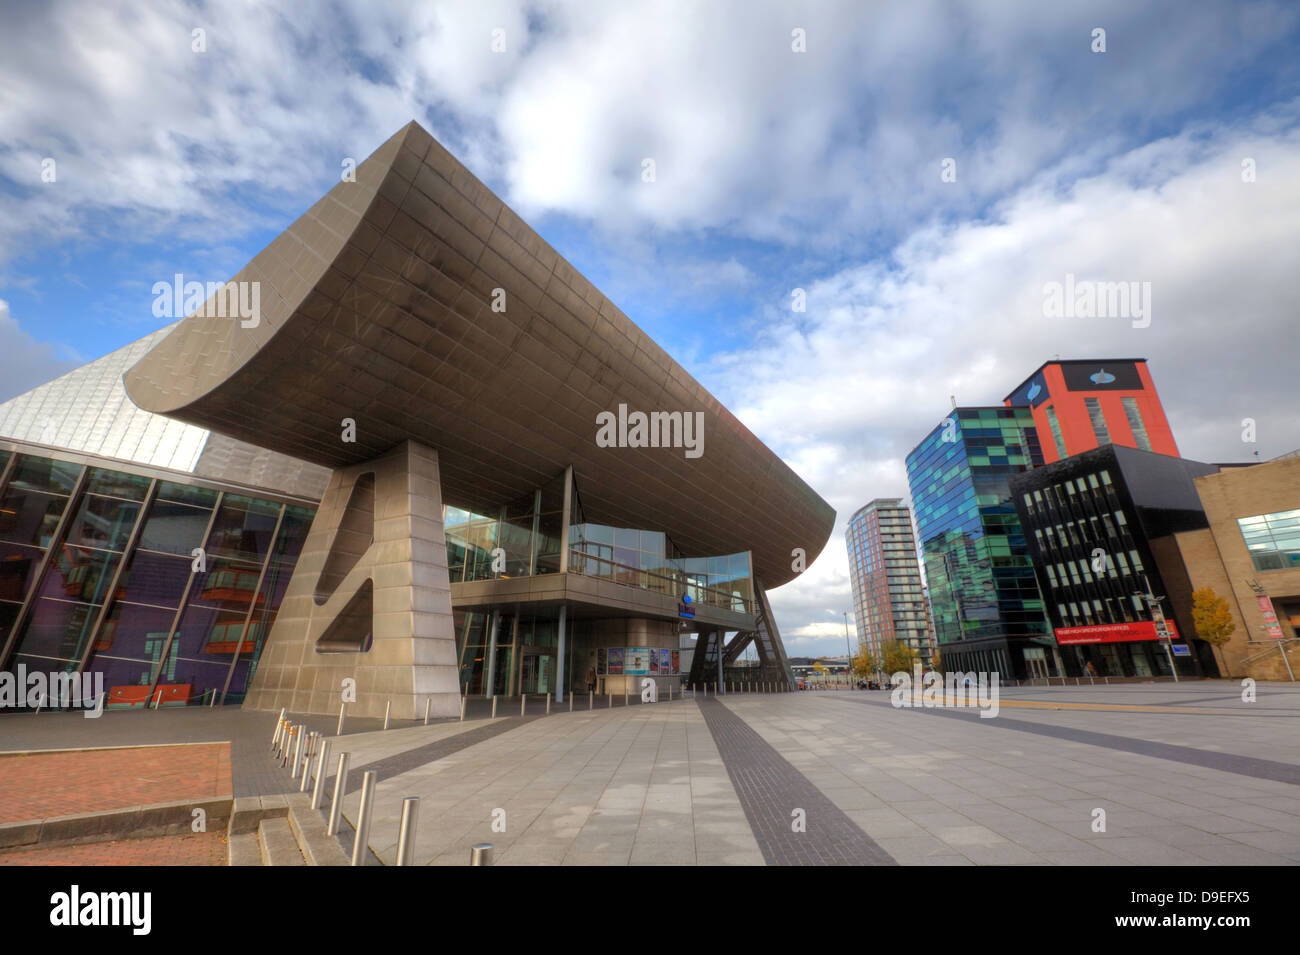 The Lowry complex was designed by Michael Wilford at Salford Quays, Manchester, England. Stock Photo